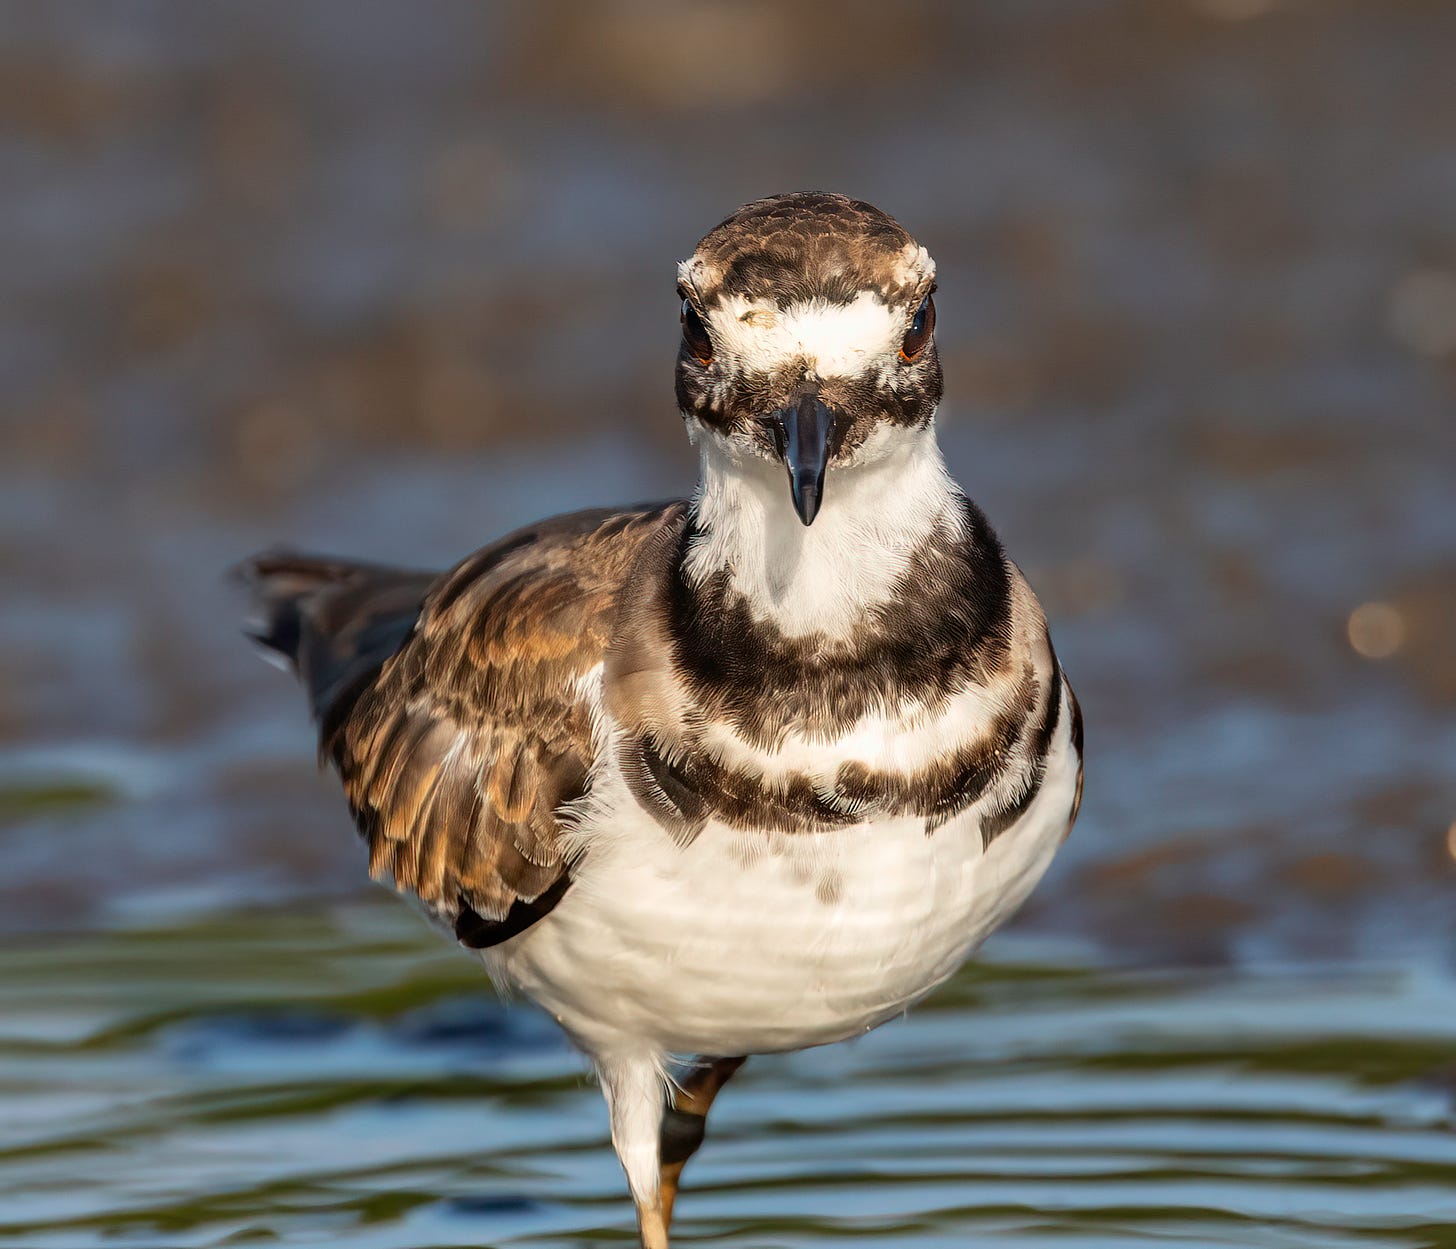 The killdeer is staring straight into the camera with his red eyes. He has two bold dark horizontal stripes on his upper breast. he also has a bright white stripe horizontally across his face. His body is mostly a carmel brown.